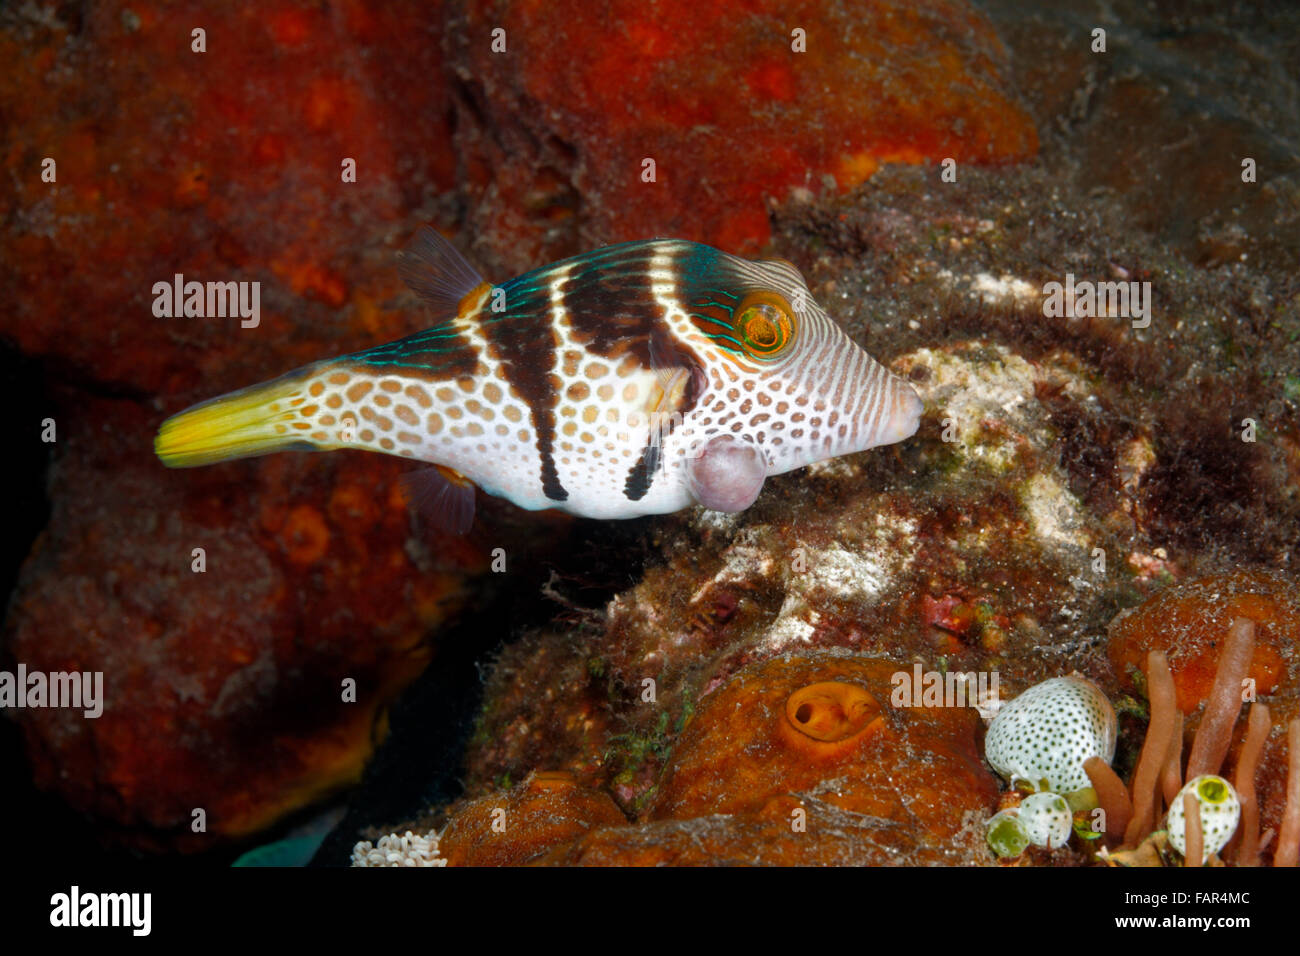 Valentine's Pufferfish, Canthigaster valentini with a facial tumor. Stock Photo